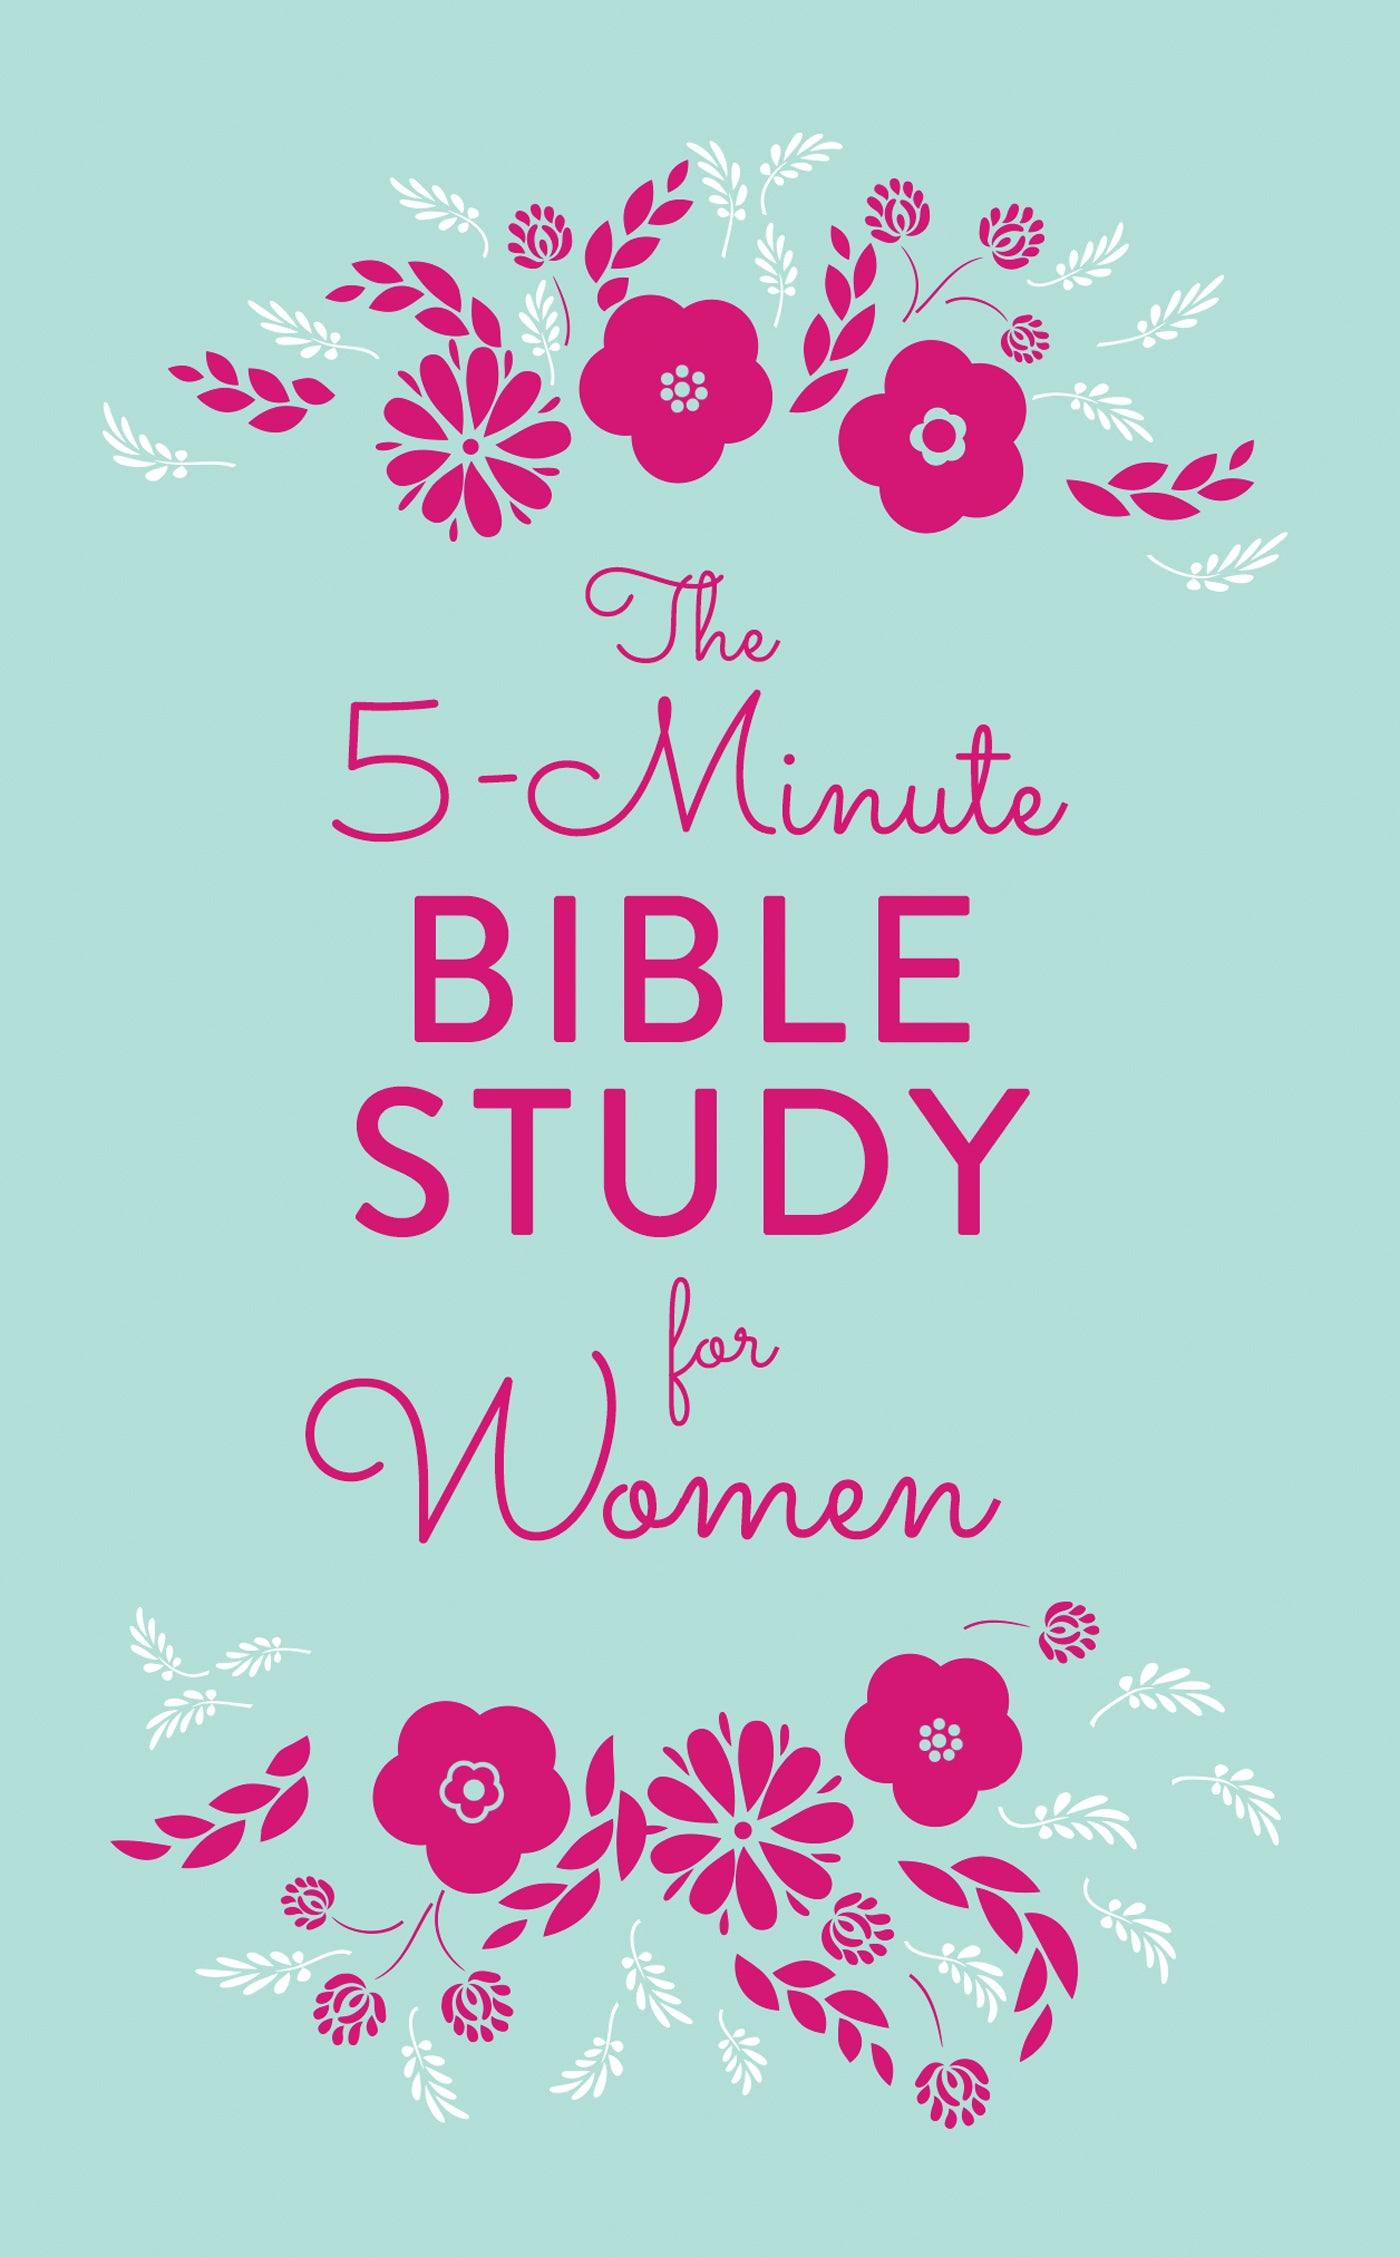 The 5-Minute Bible Study for Women - The Christian Gift Company